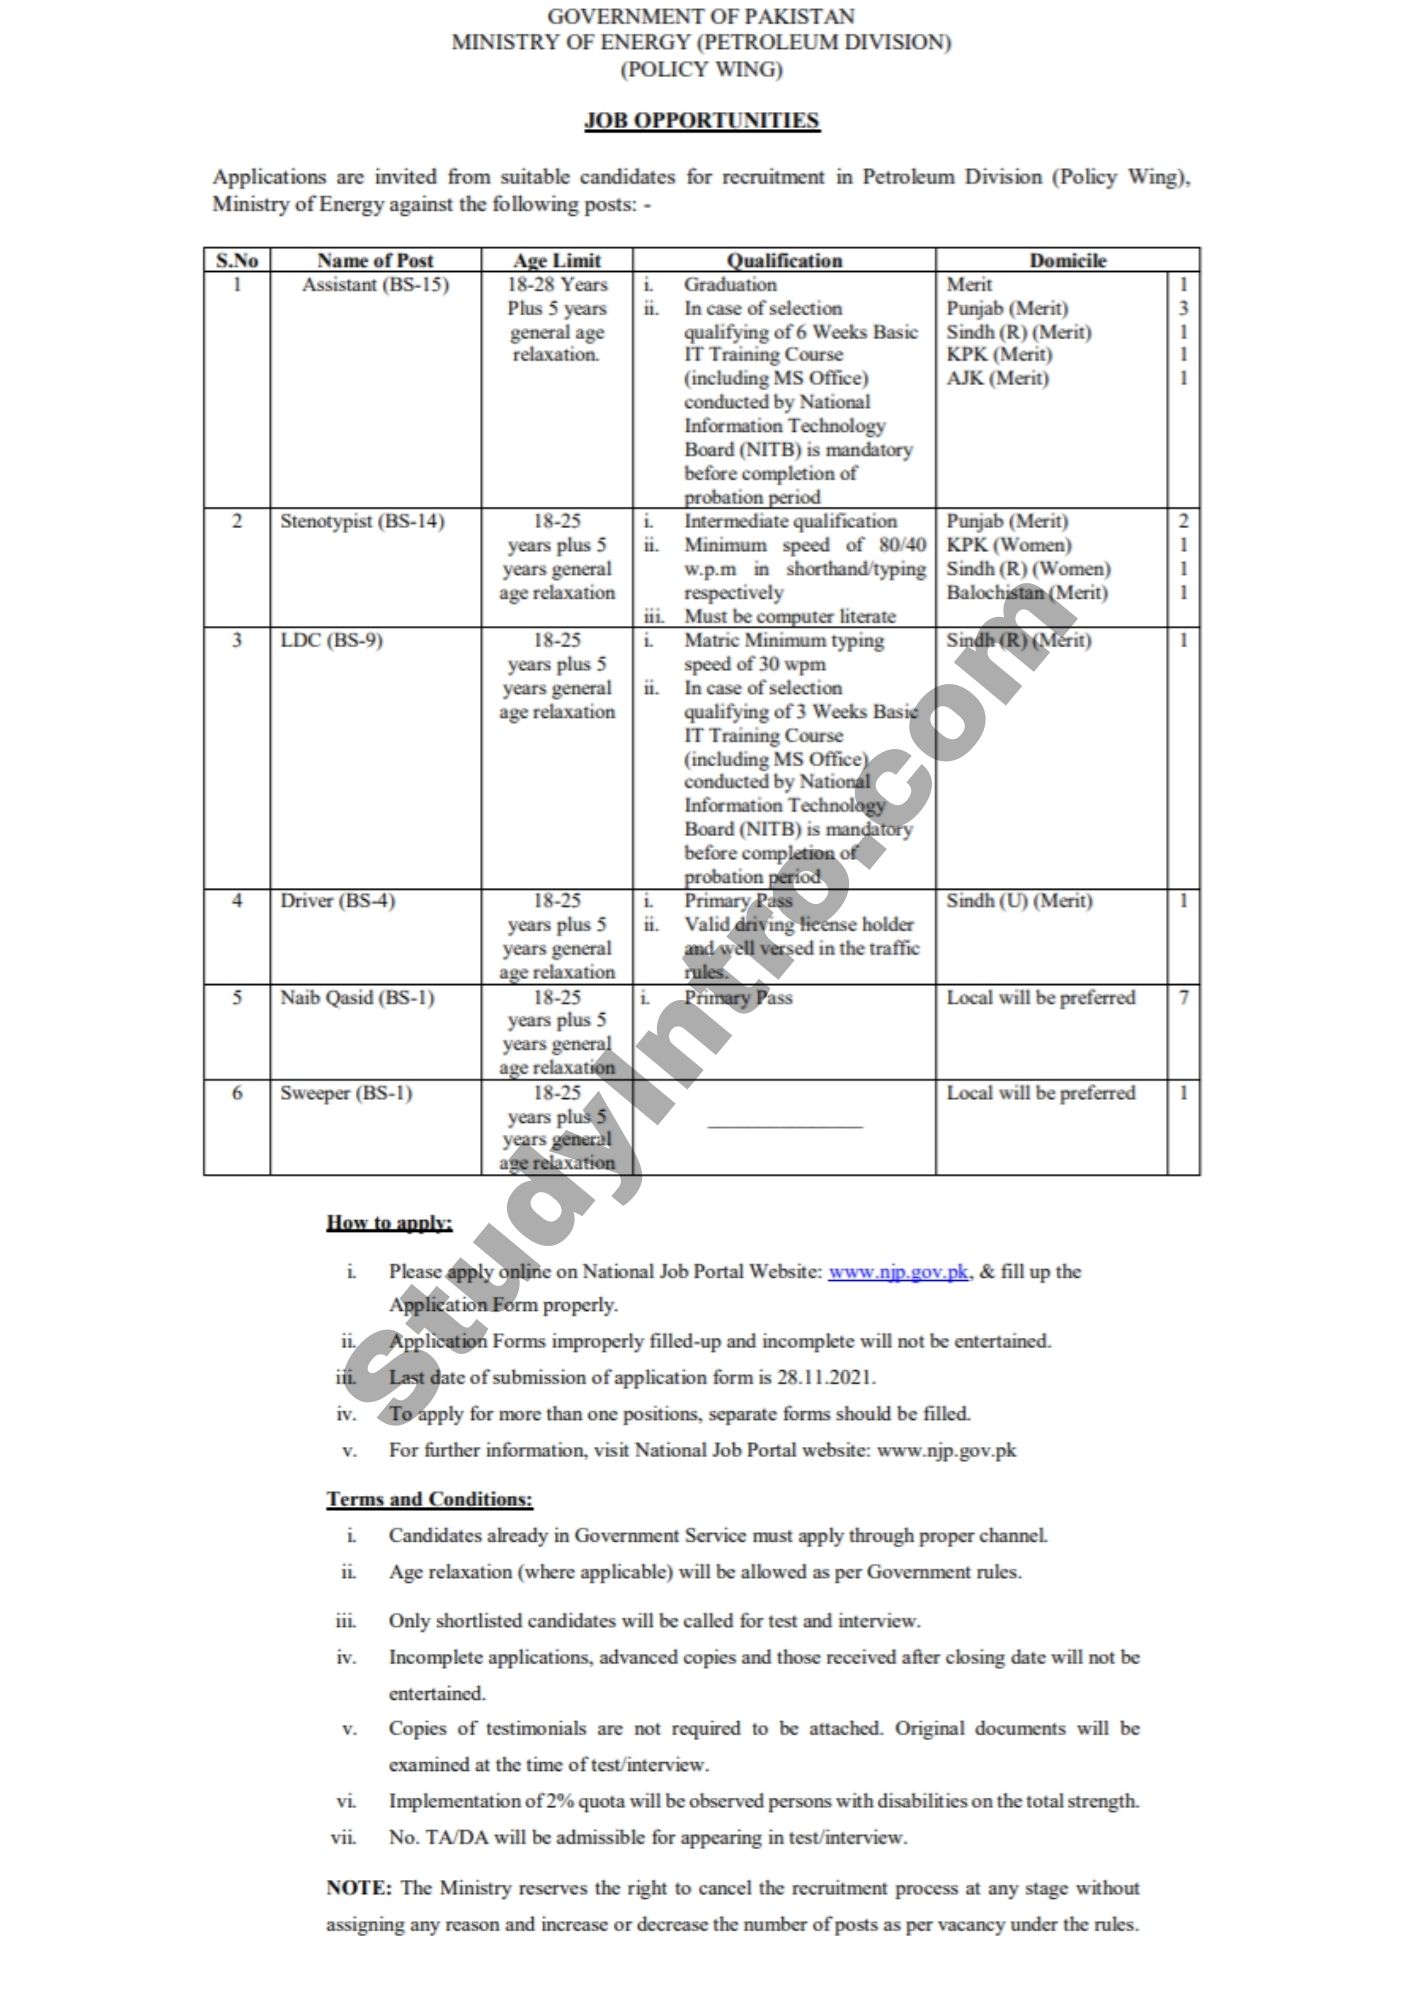 Jobs Opportunities in Petroleum Division Ministry of Energy 2021